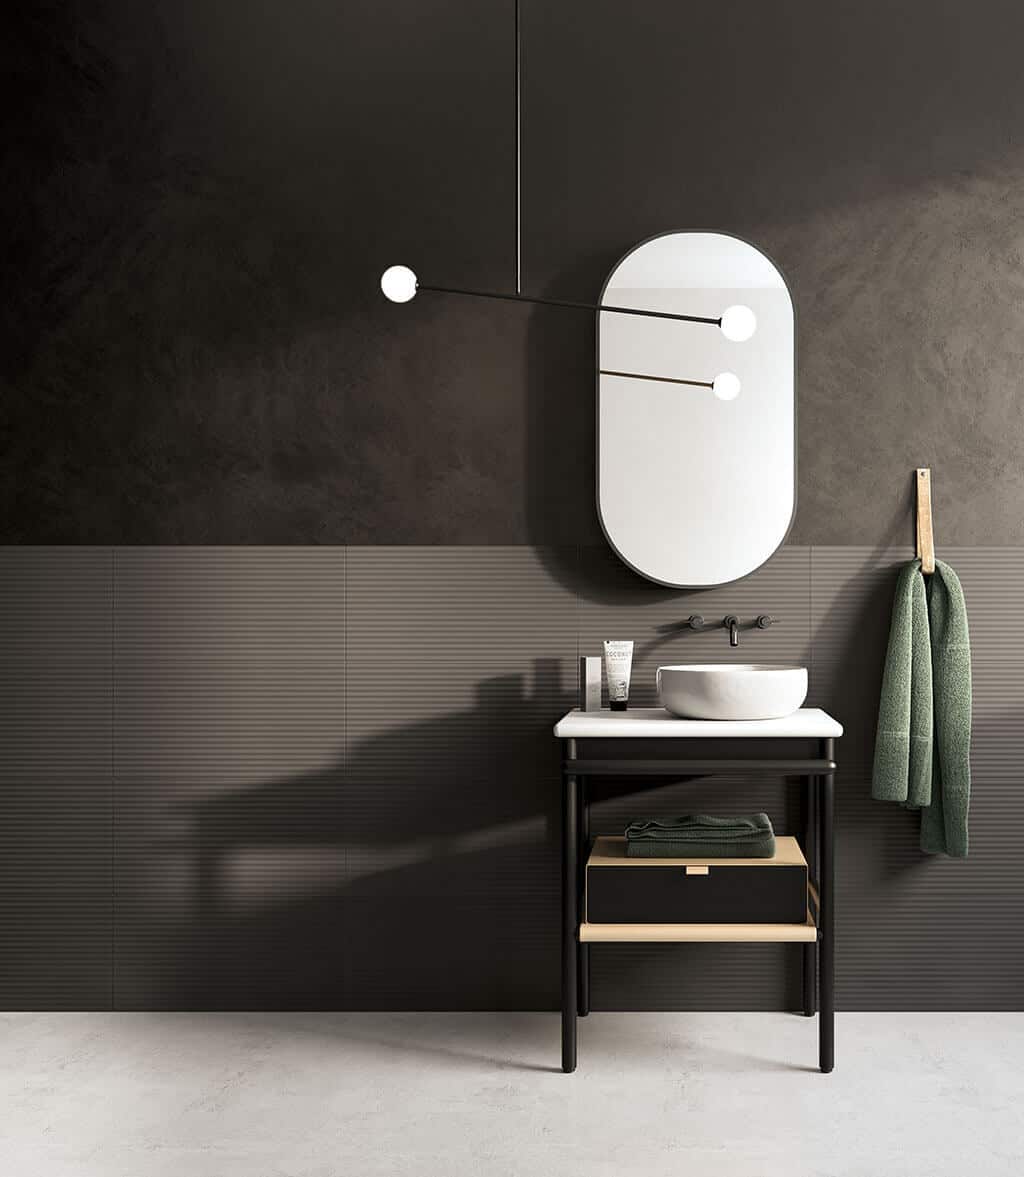 Linea Grafite textured wall tiles from European Heritage used in a bathroom behind a small console with basin on top and curved mirror above